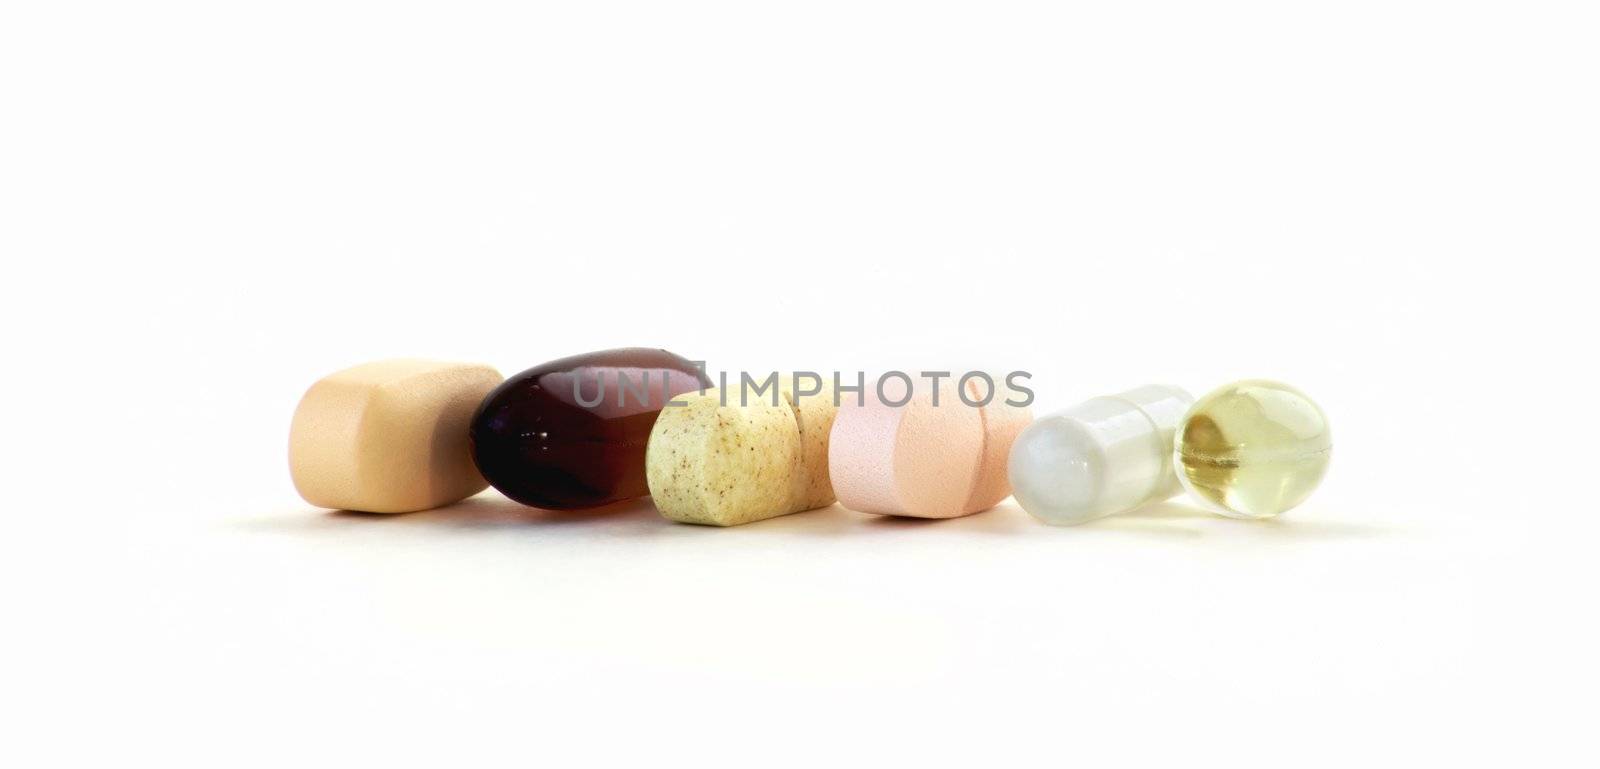 Vitamins and Supplements Isoltaed Against a Pure White Background.